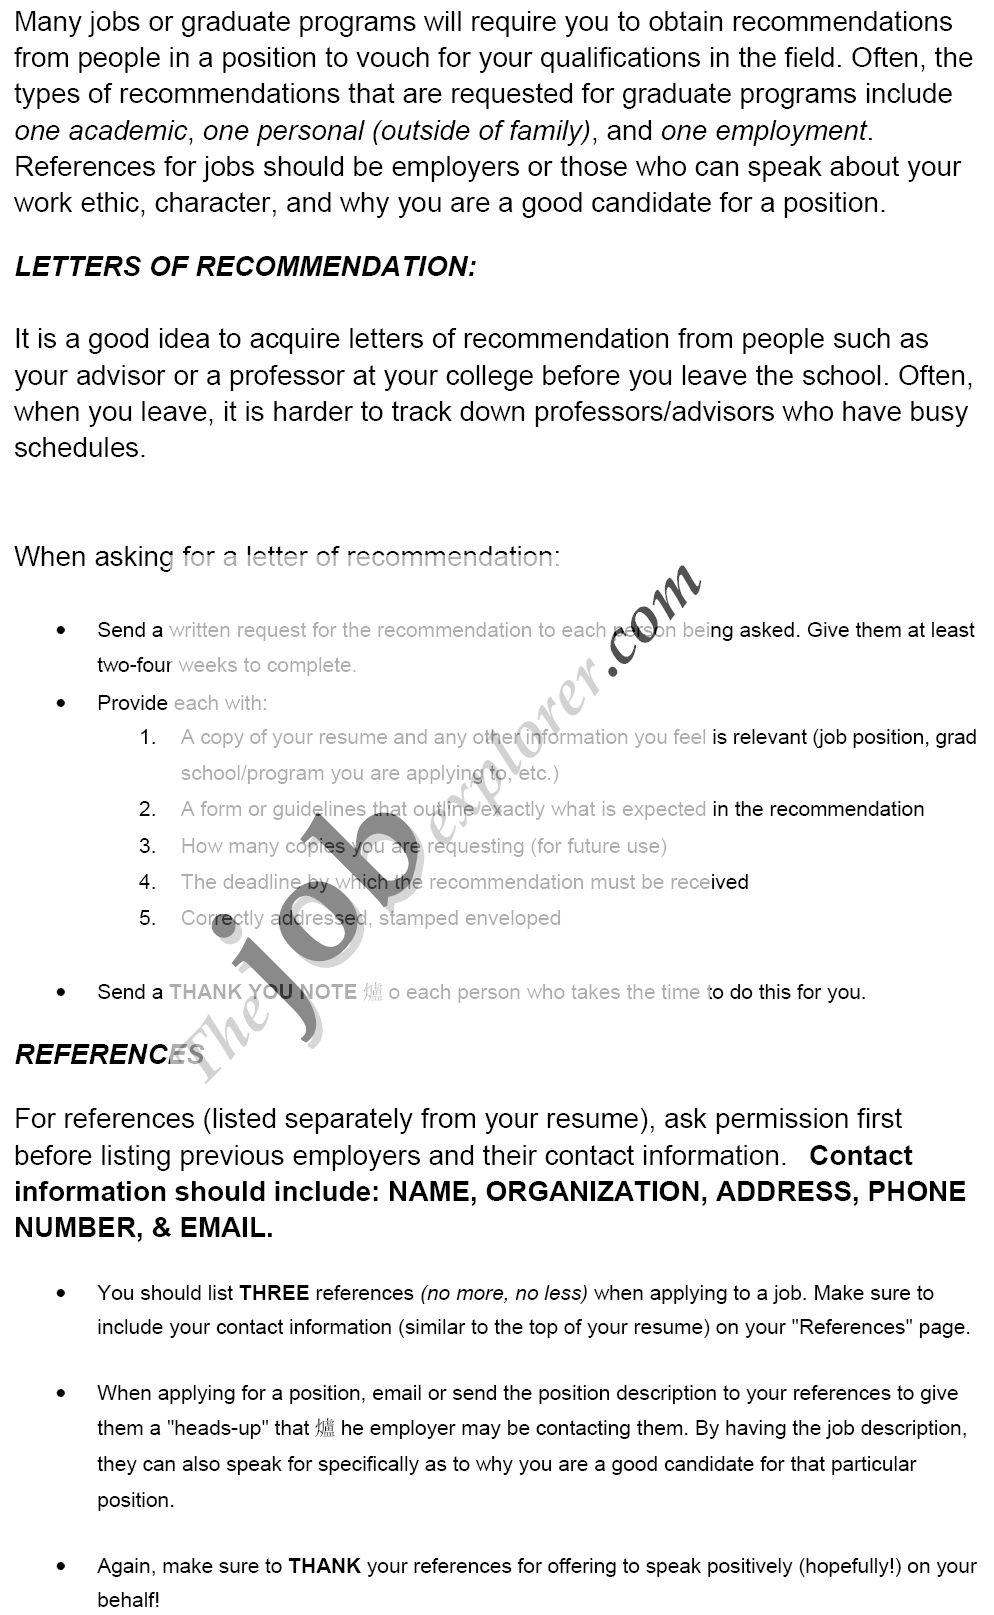 Sample Academic Recommendation Letter from www.thejobexplorer.com